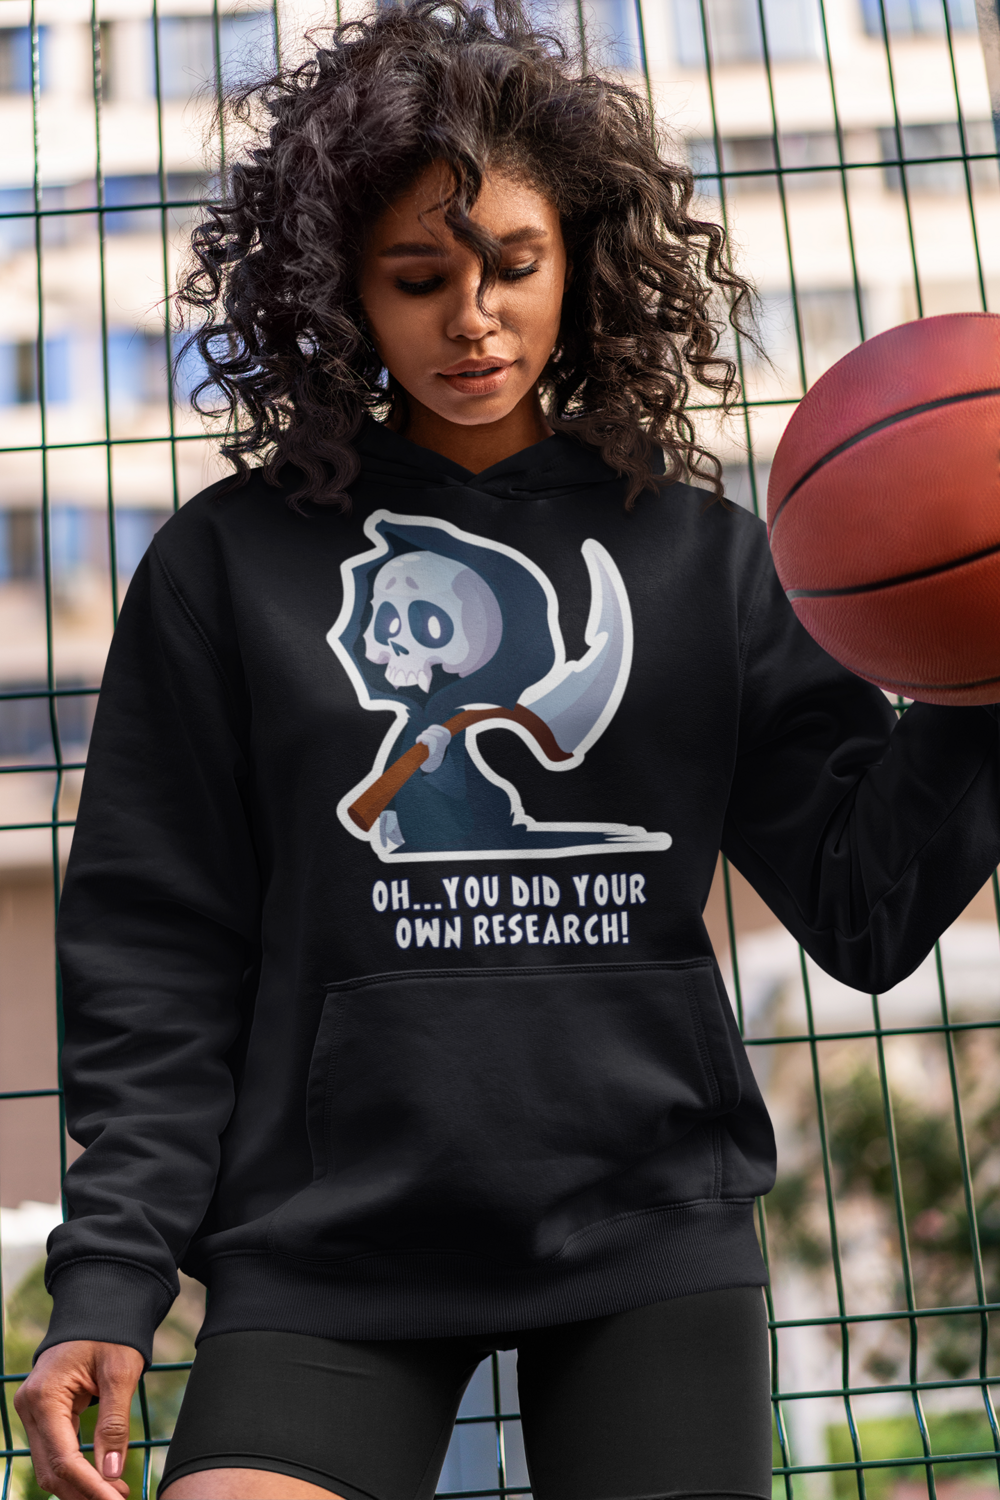 "Oh you did your own Research" girls Hoodie